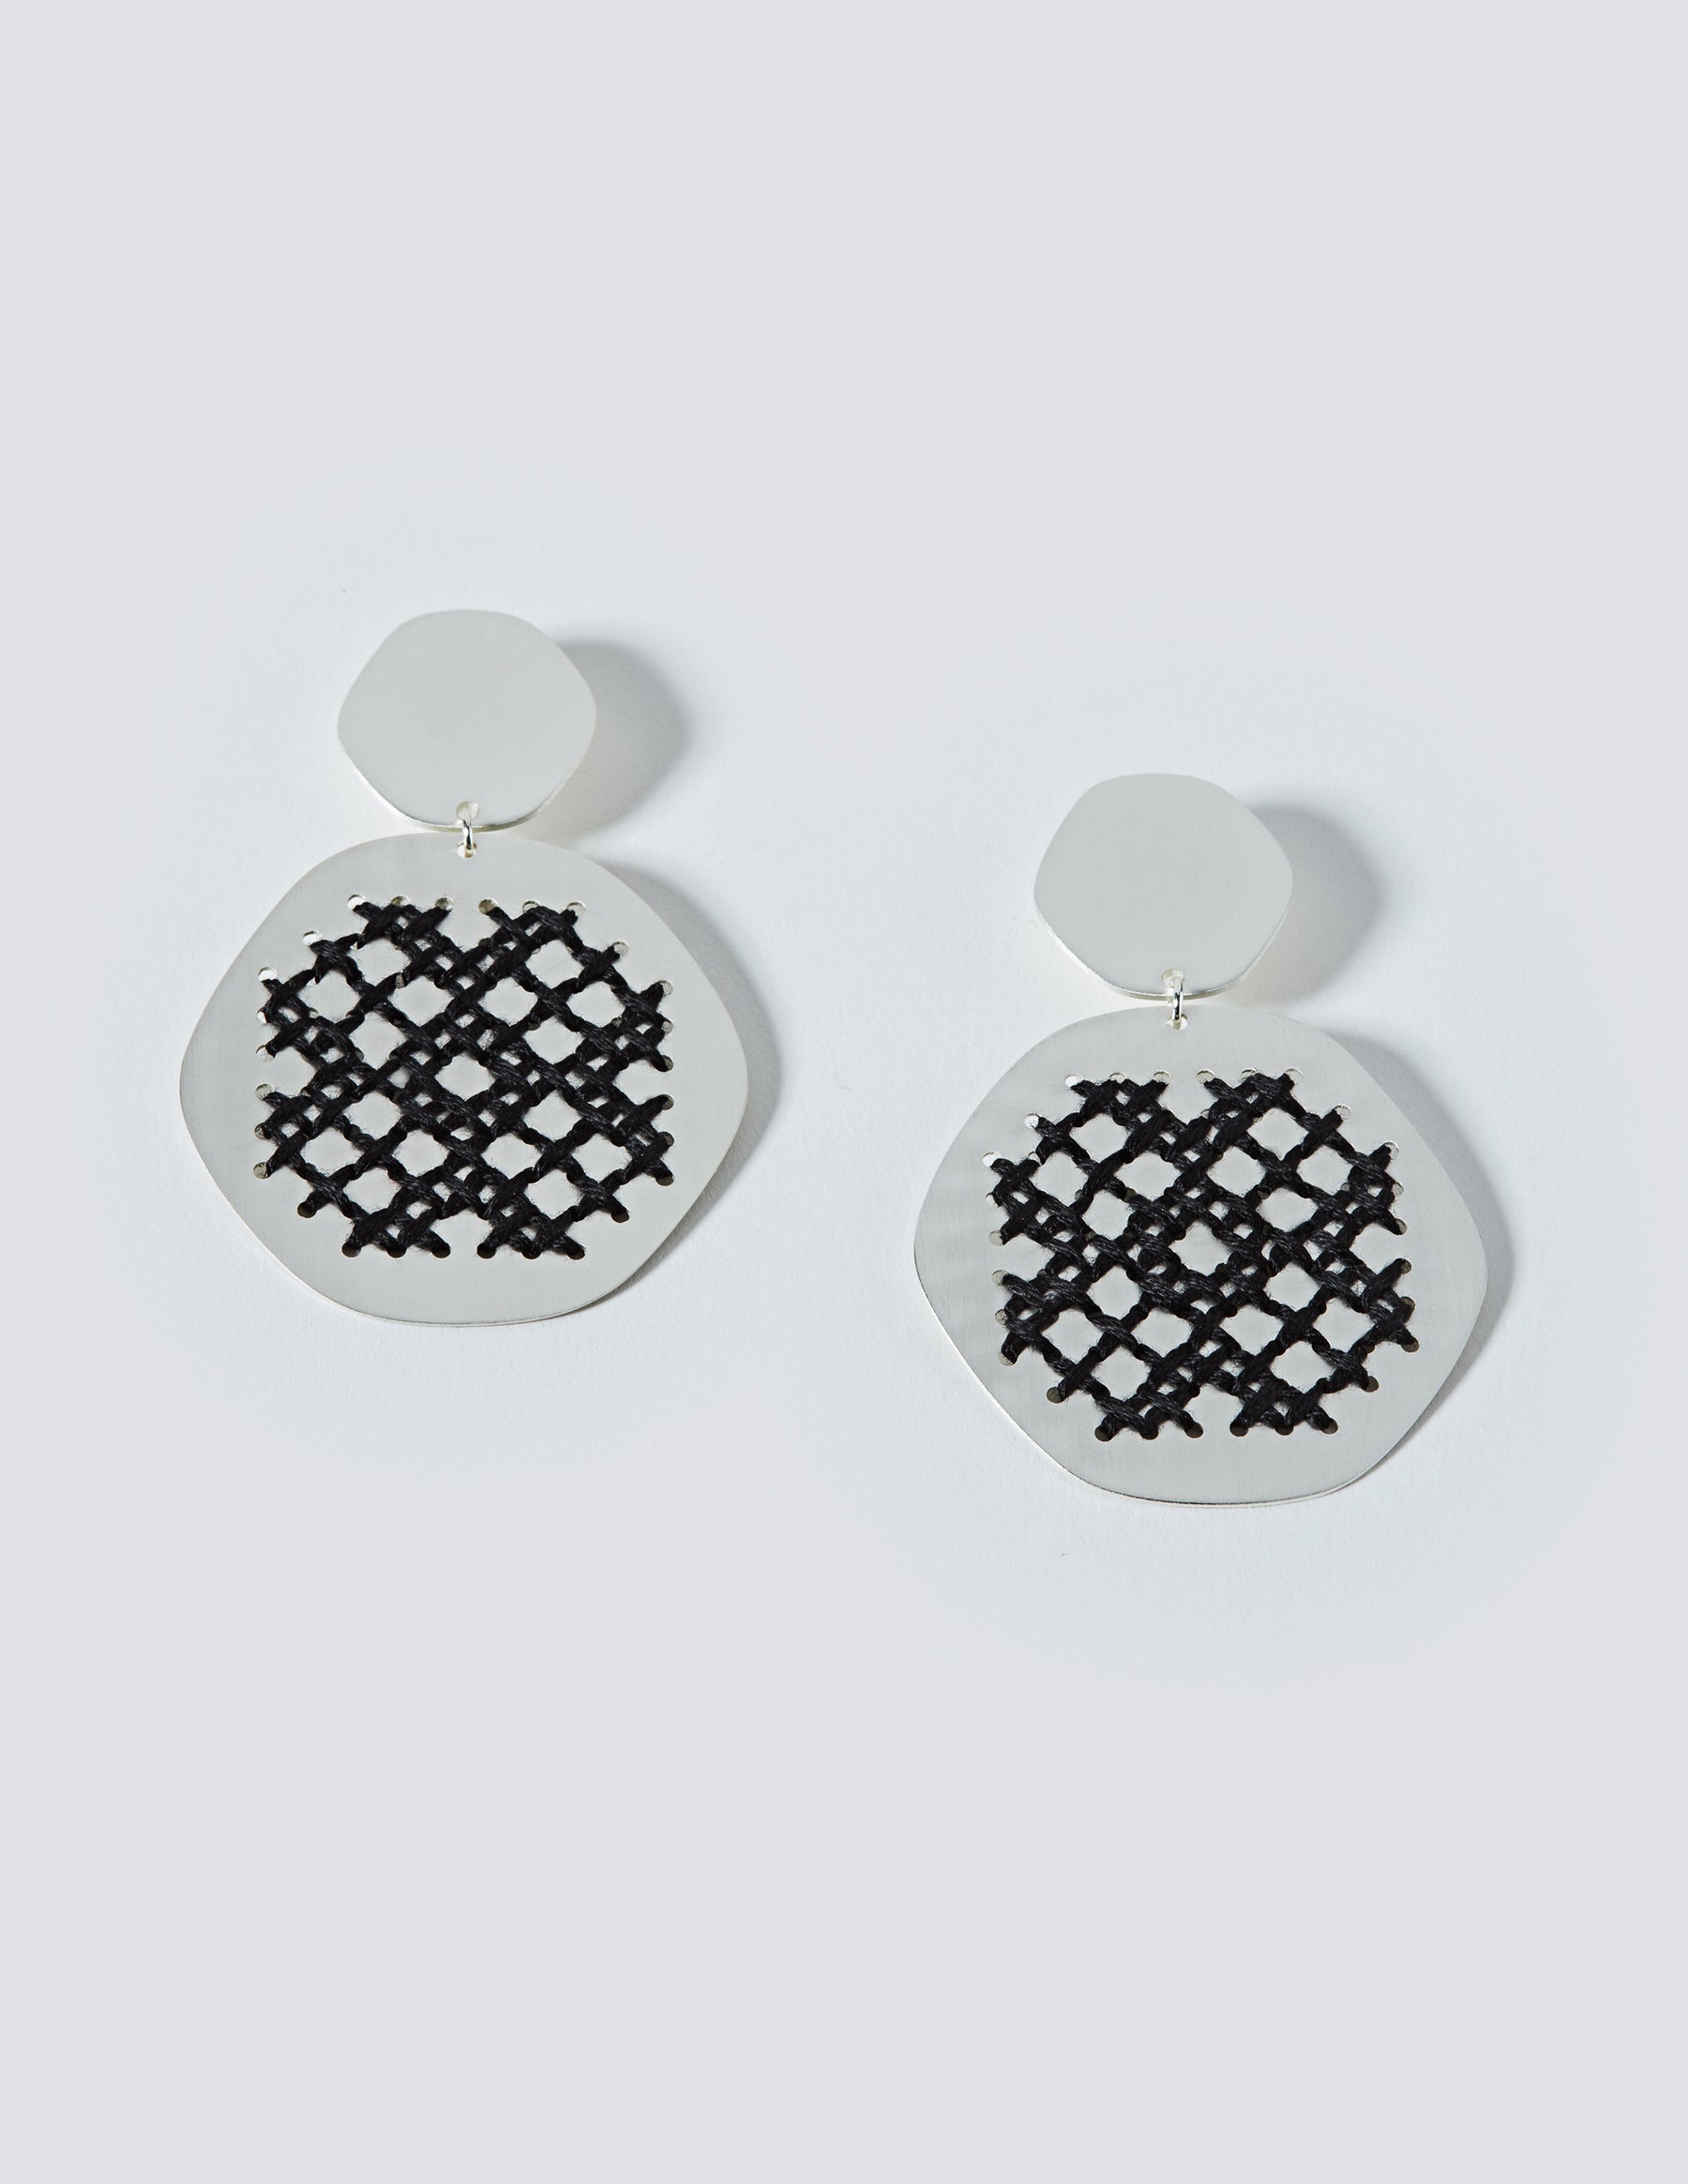 Lace Silver Earrings - CHARALAMPIA